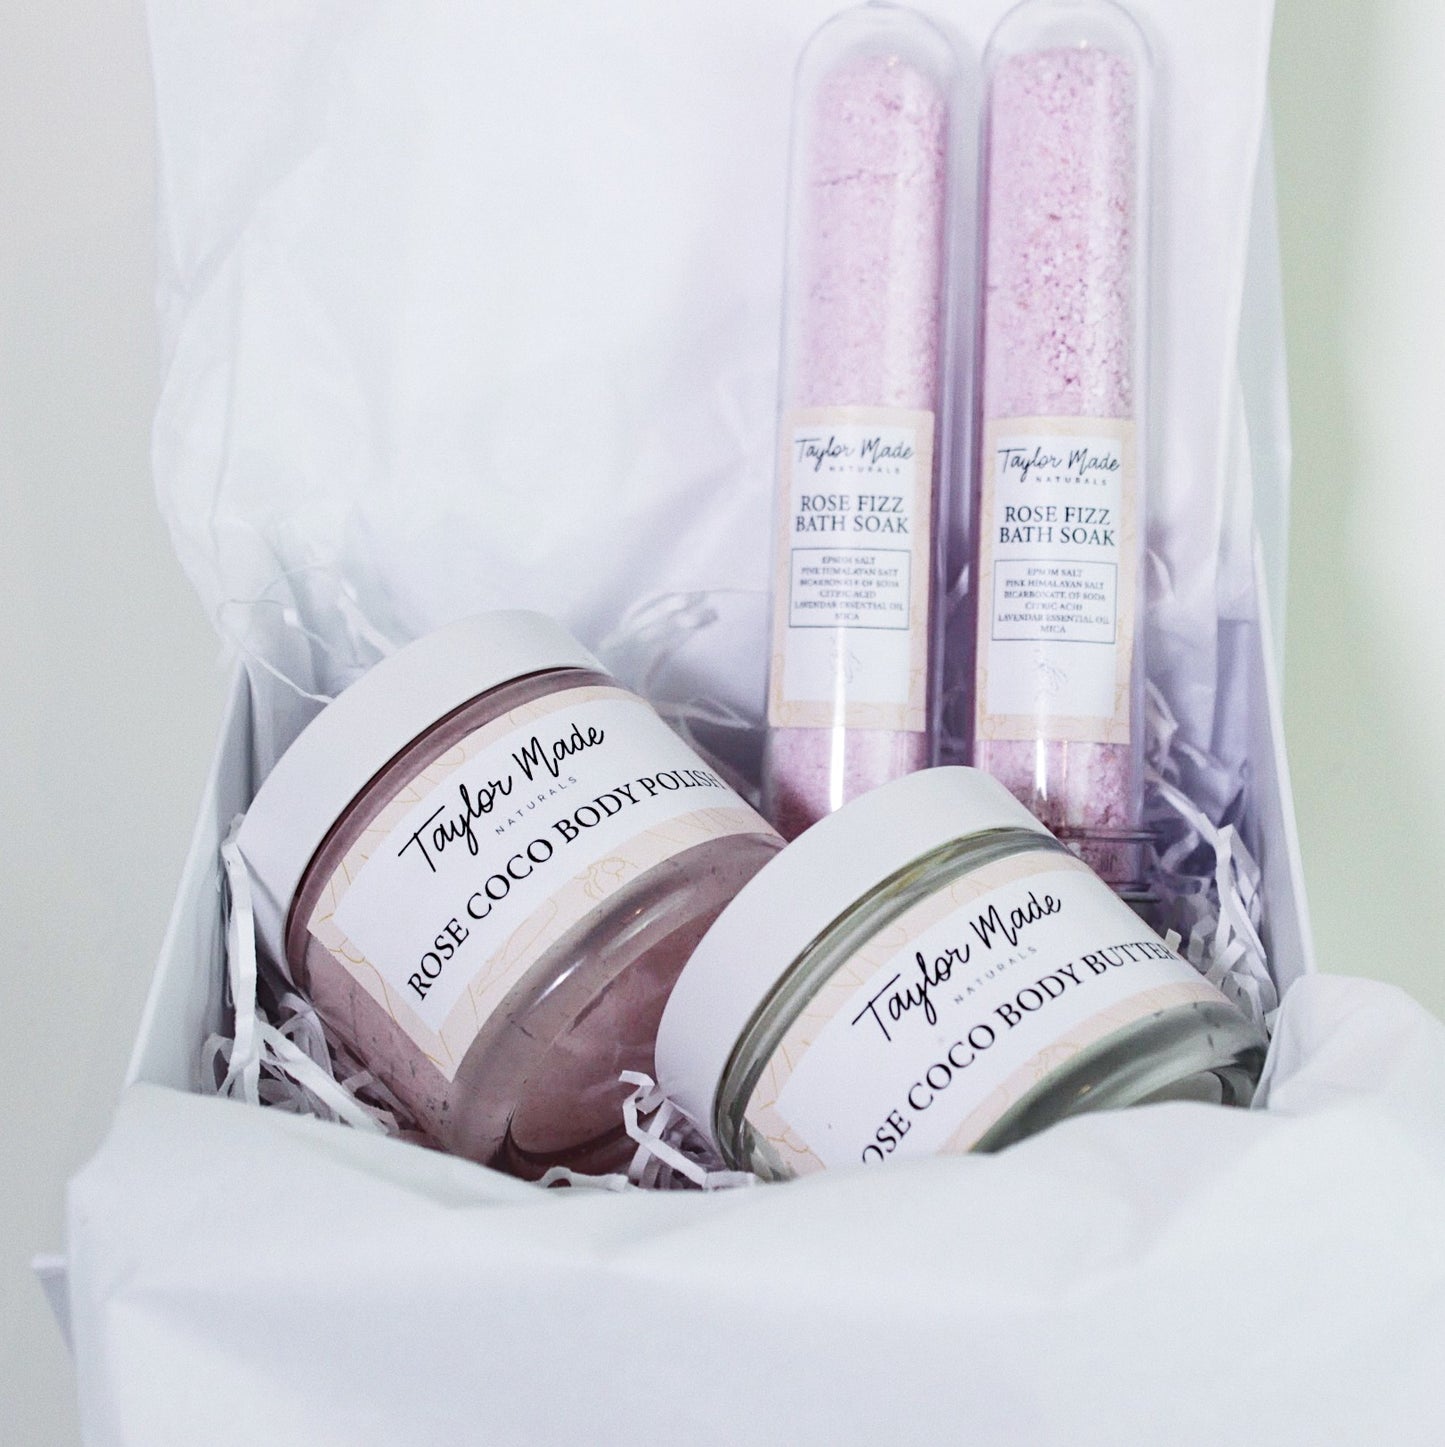 Luxe Self-care gift box